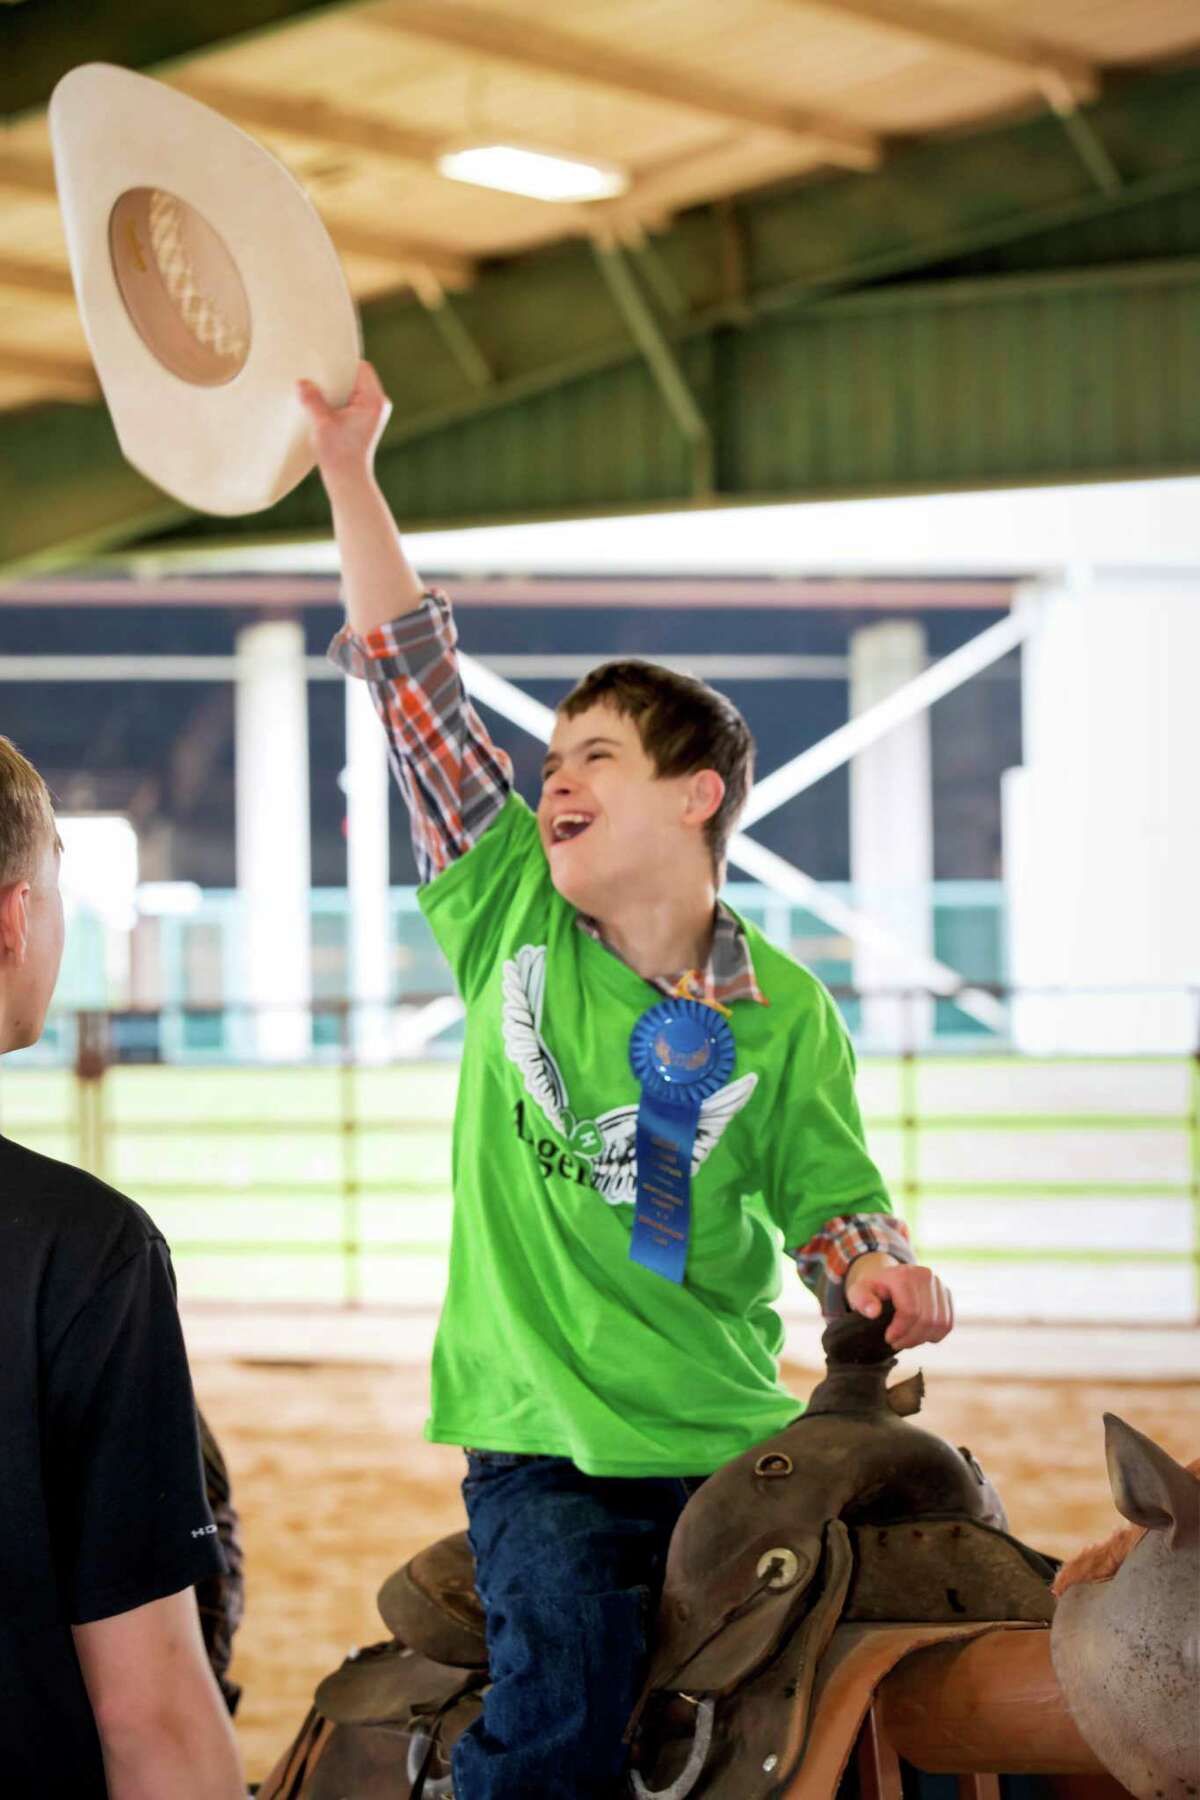 The 4th Annual Montgomery County 4-H Angels Rodeo took place March 10 at the Lone Star Equestrian Center in Conroe.